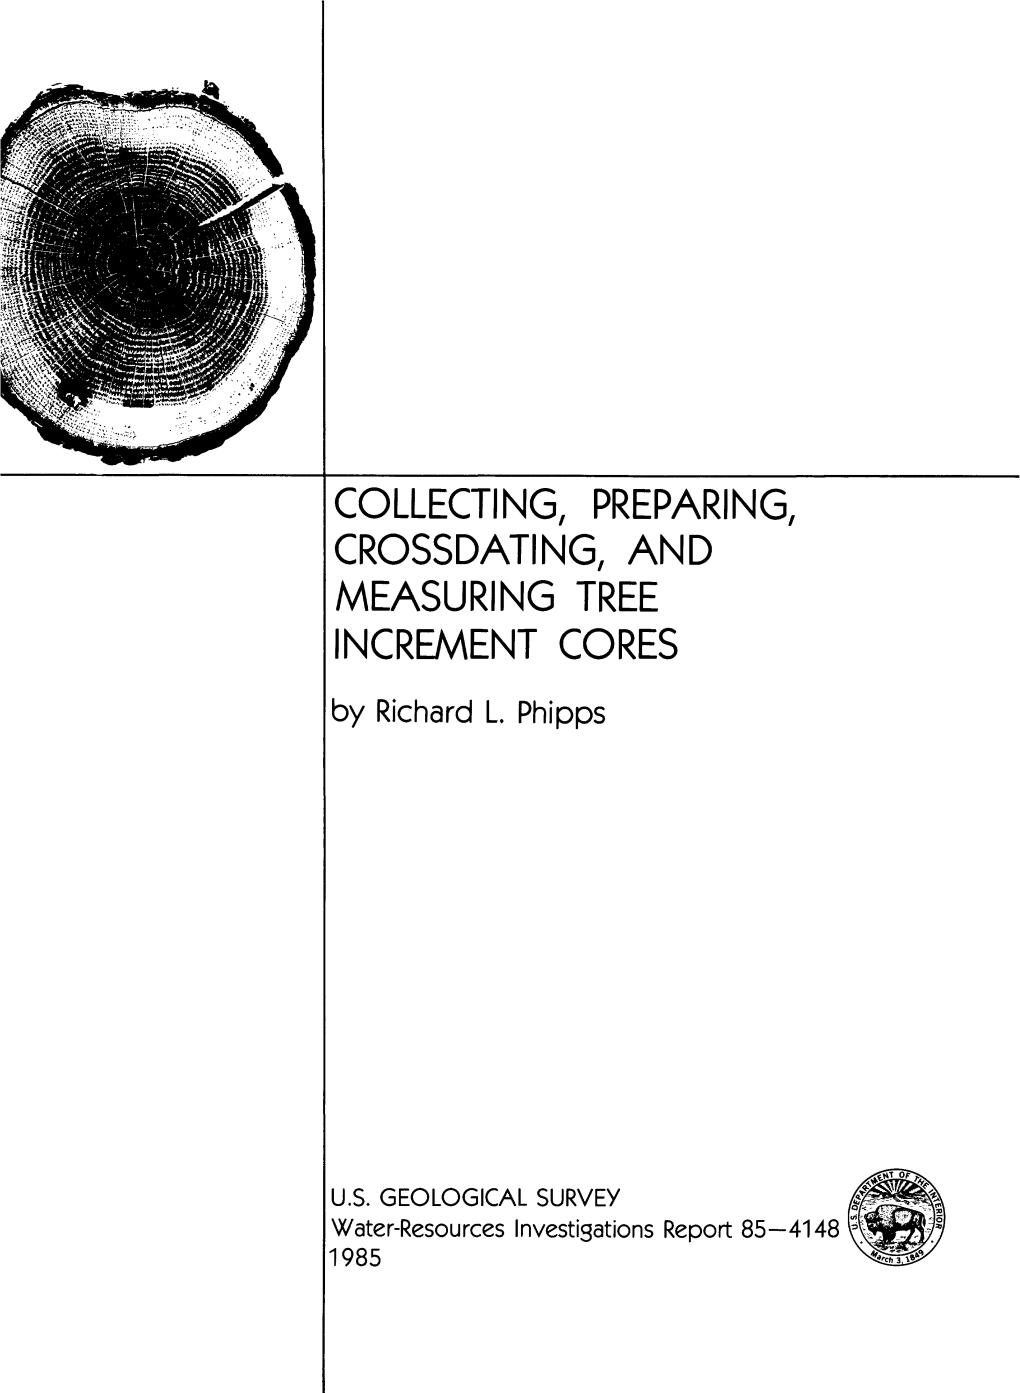 COLLECTING, PREPARING, CROSSDATING, and MEASURING TREE INCREMENT CORES by Richard L